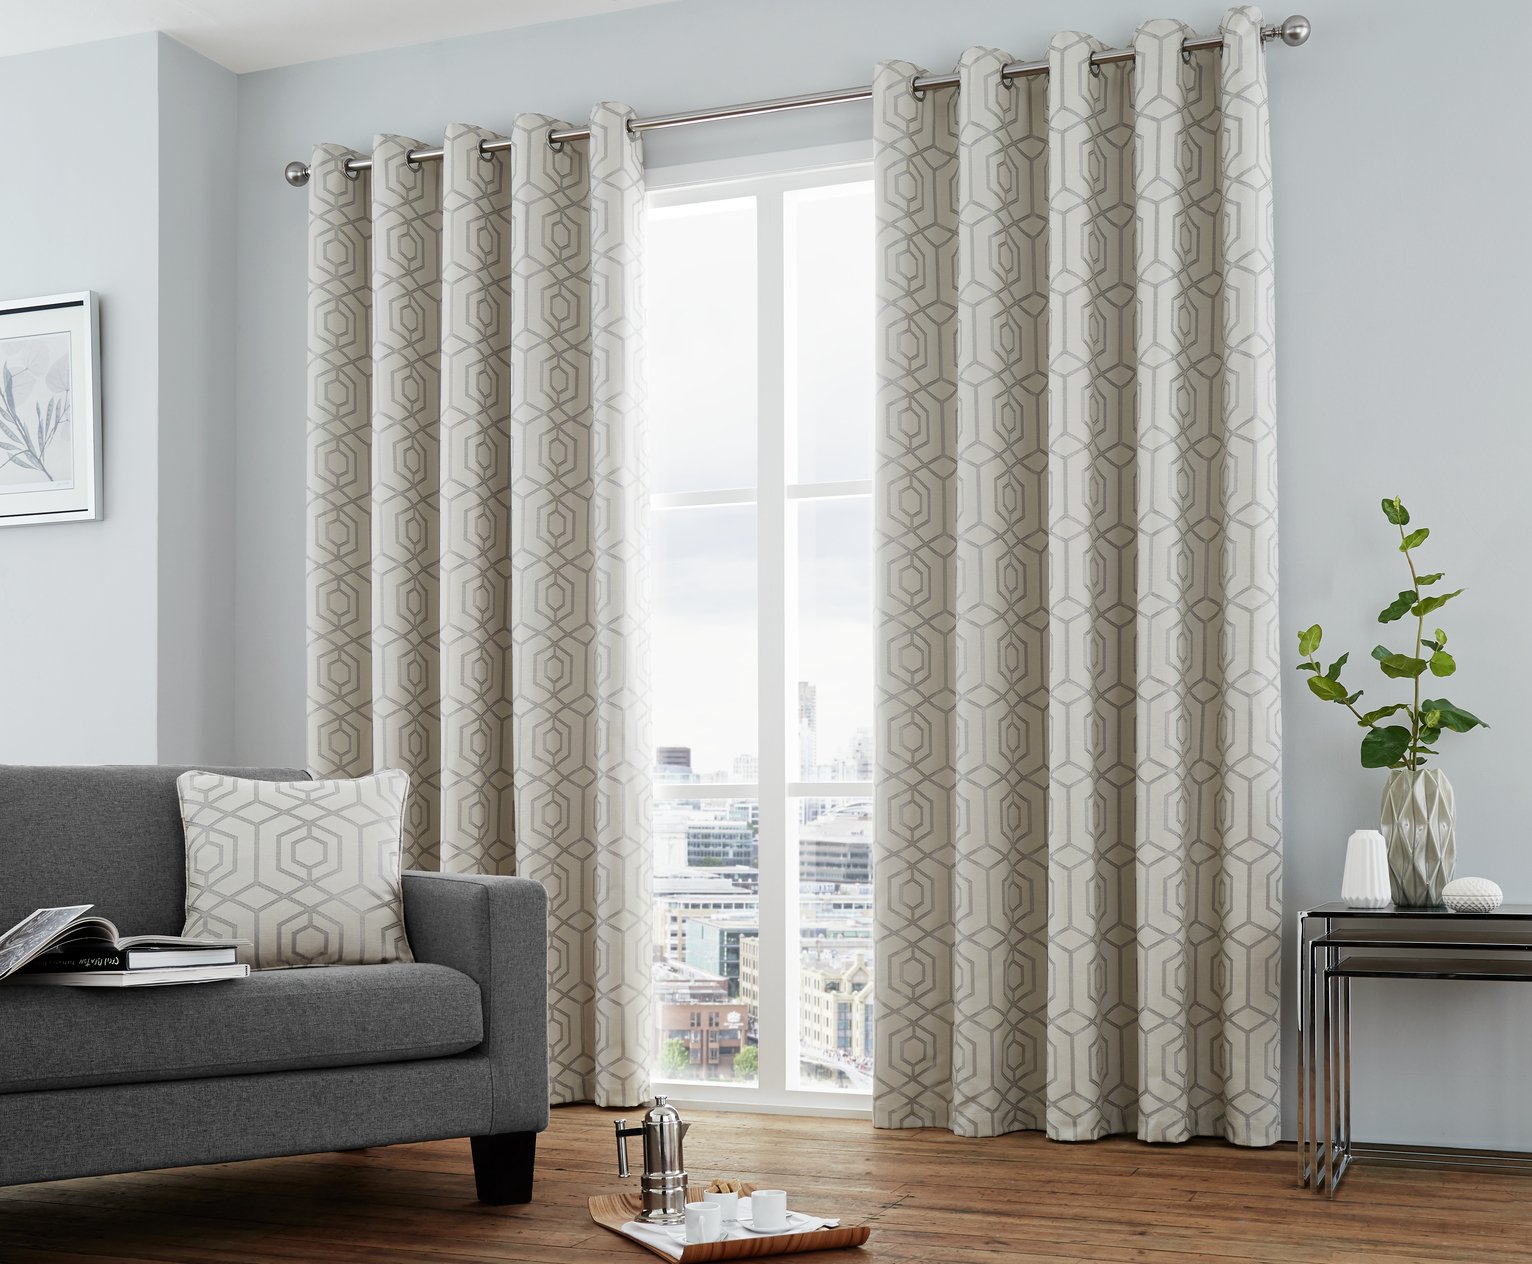 Curtina Camberwell Eyelet Curtains - 168x183cm - Silver